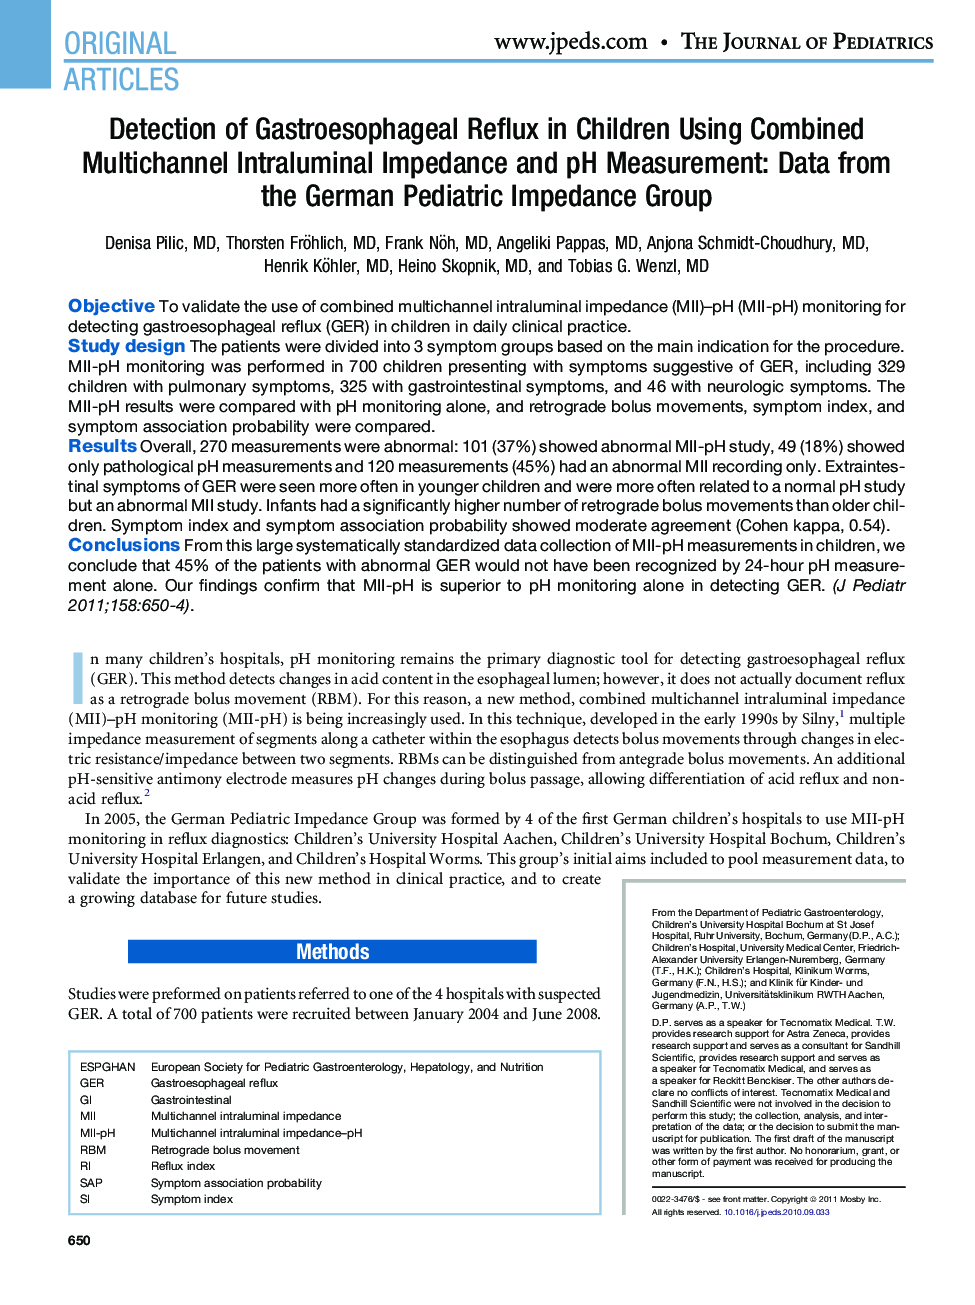 Detection of Gastroesophageal Reflux in Children Using Combined Multichannel Intraluminal Impedance and pH Measurement: Data from the German Pediatric Impedance Group